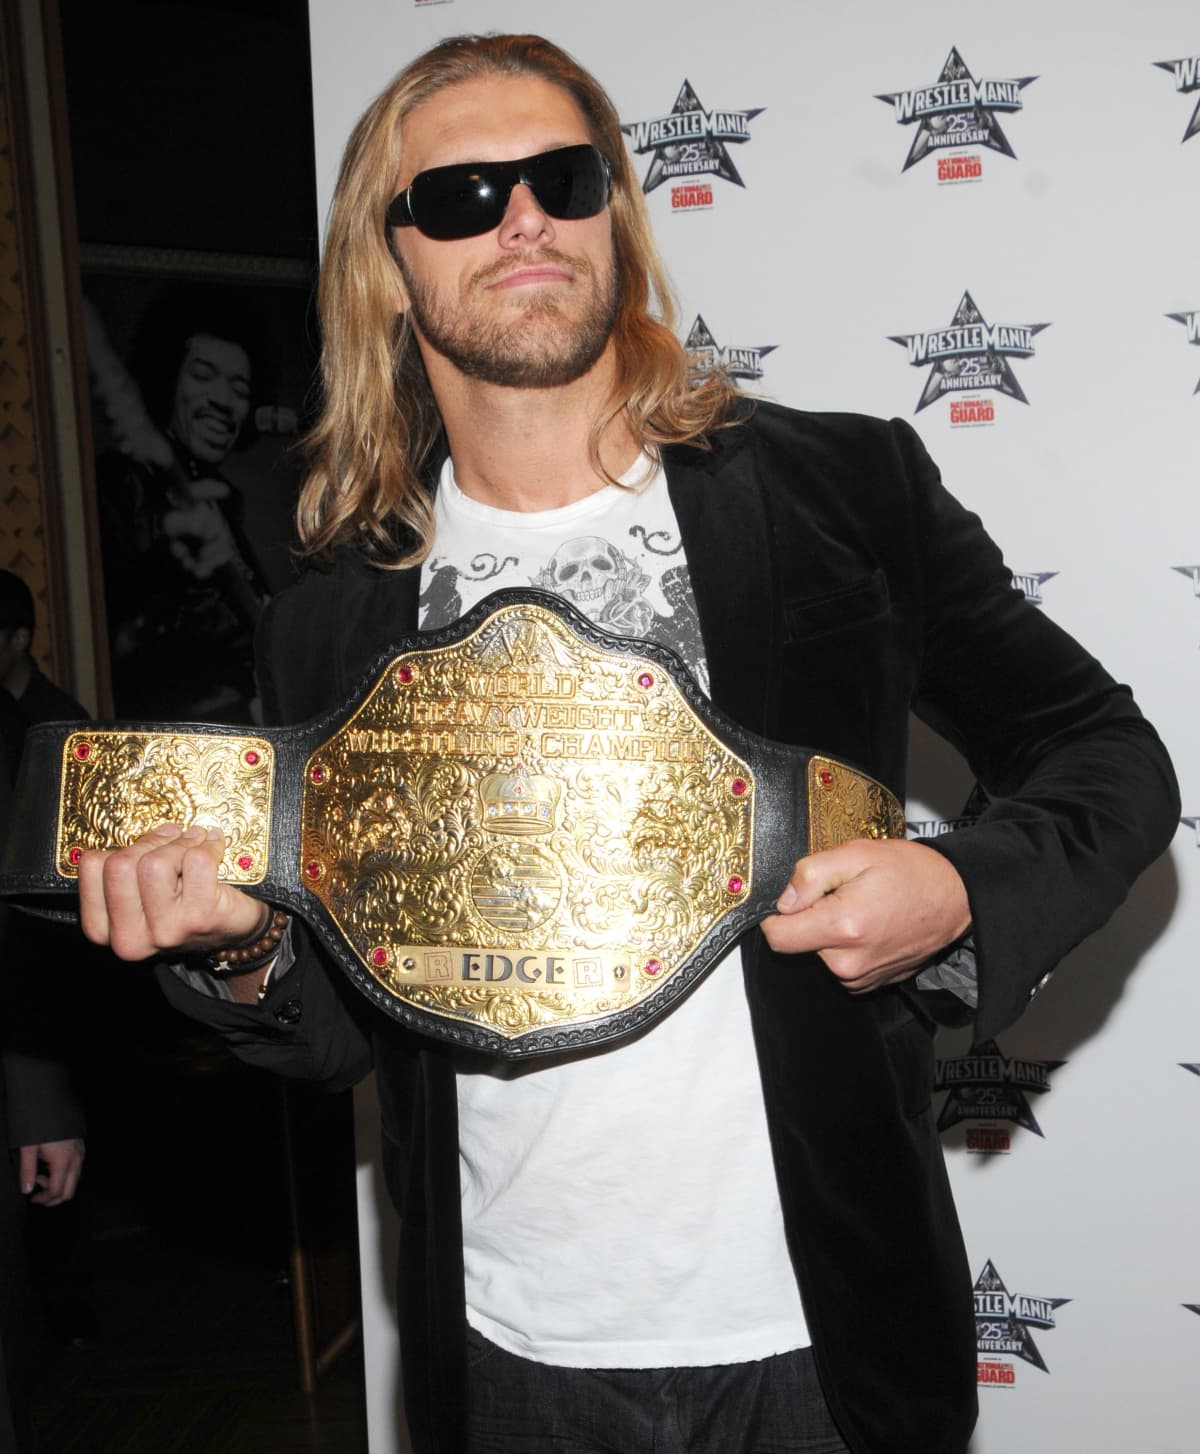 SYDNEY, AUSTRALIA - JUNE 15:  World Heavyweight Champion Edge looks on during WWE Smackdown at Acer Arena on June 15, 2008 in Sydney, Australia.  (Photo by Gaye Gerard/Getty Images)